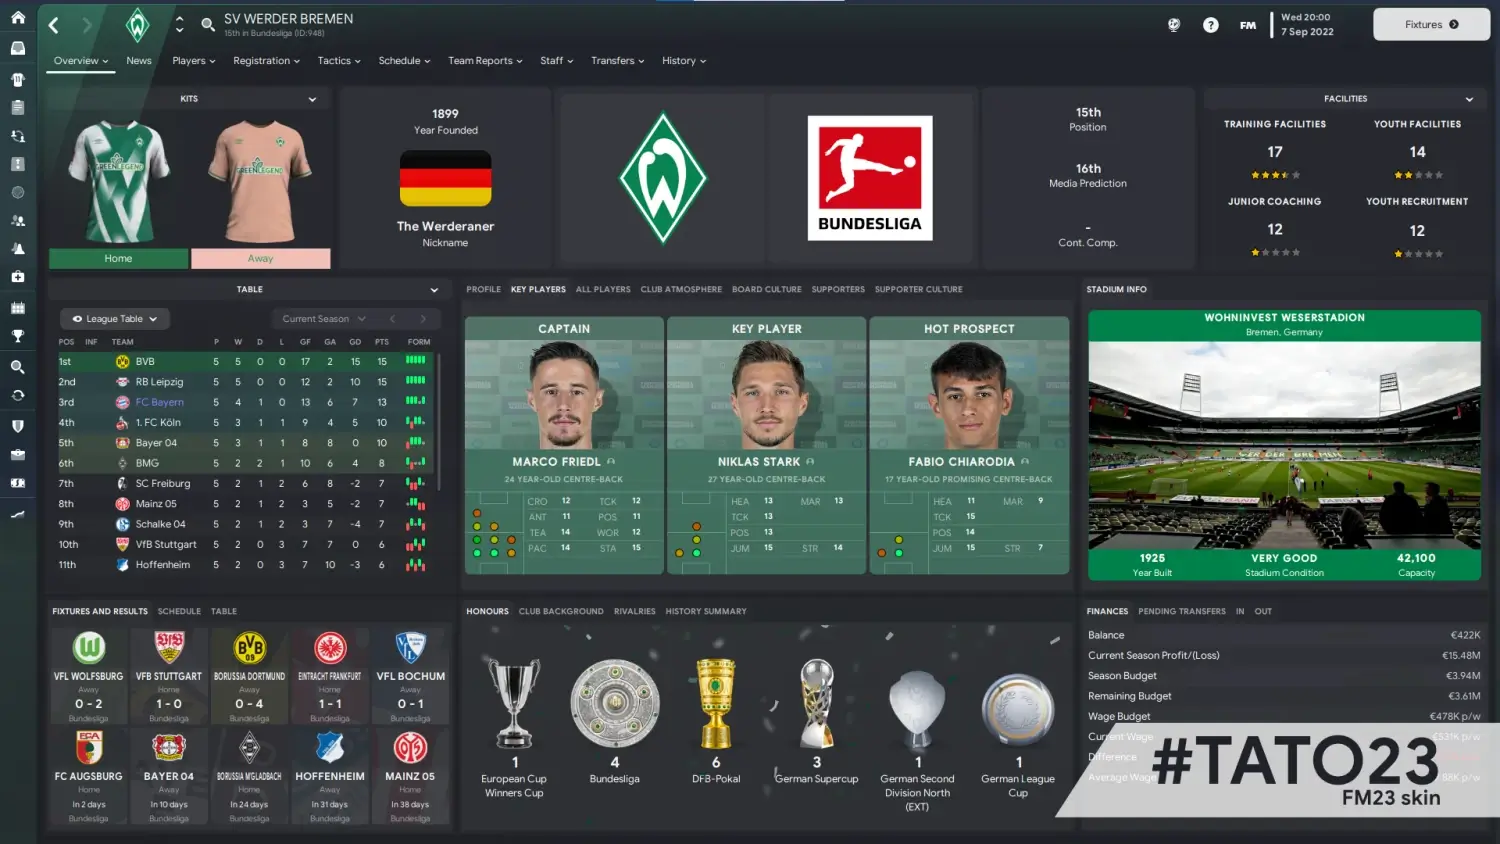 Football Manager 2023 Tato23 club overview